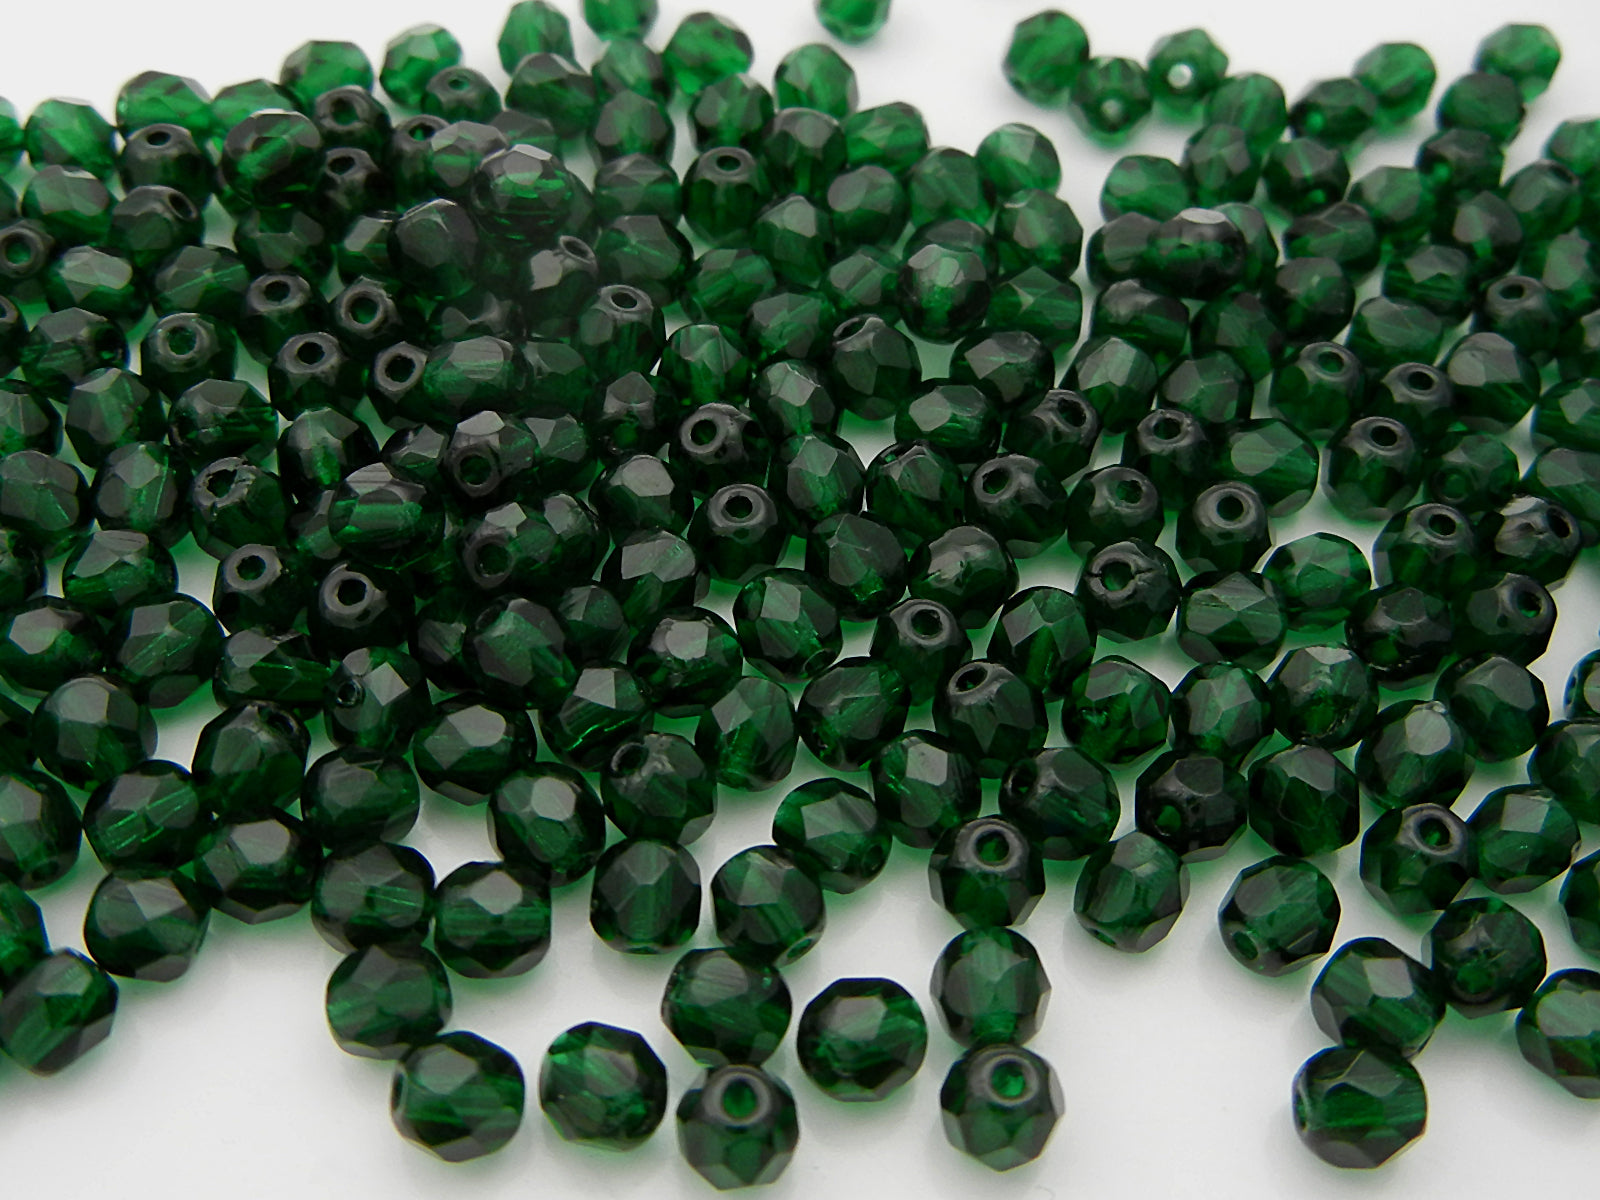 Medium Emerald, loose Czech Fire Polished Round Faceted Glass Beads, green, 3mm, 4mm, 6mm, 8mm